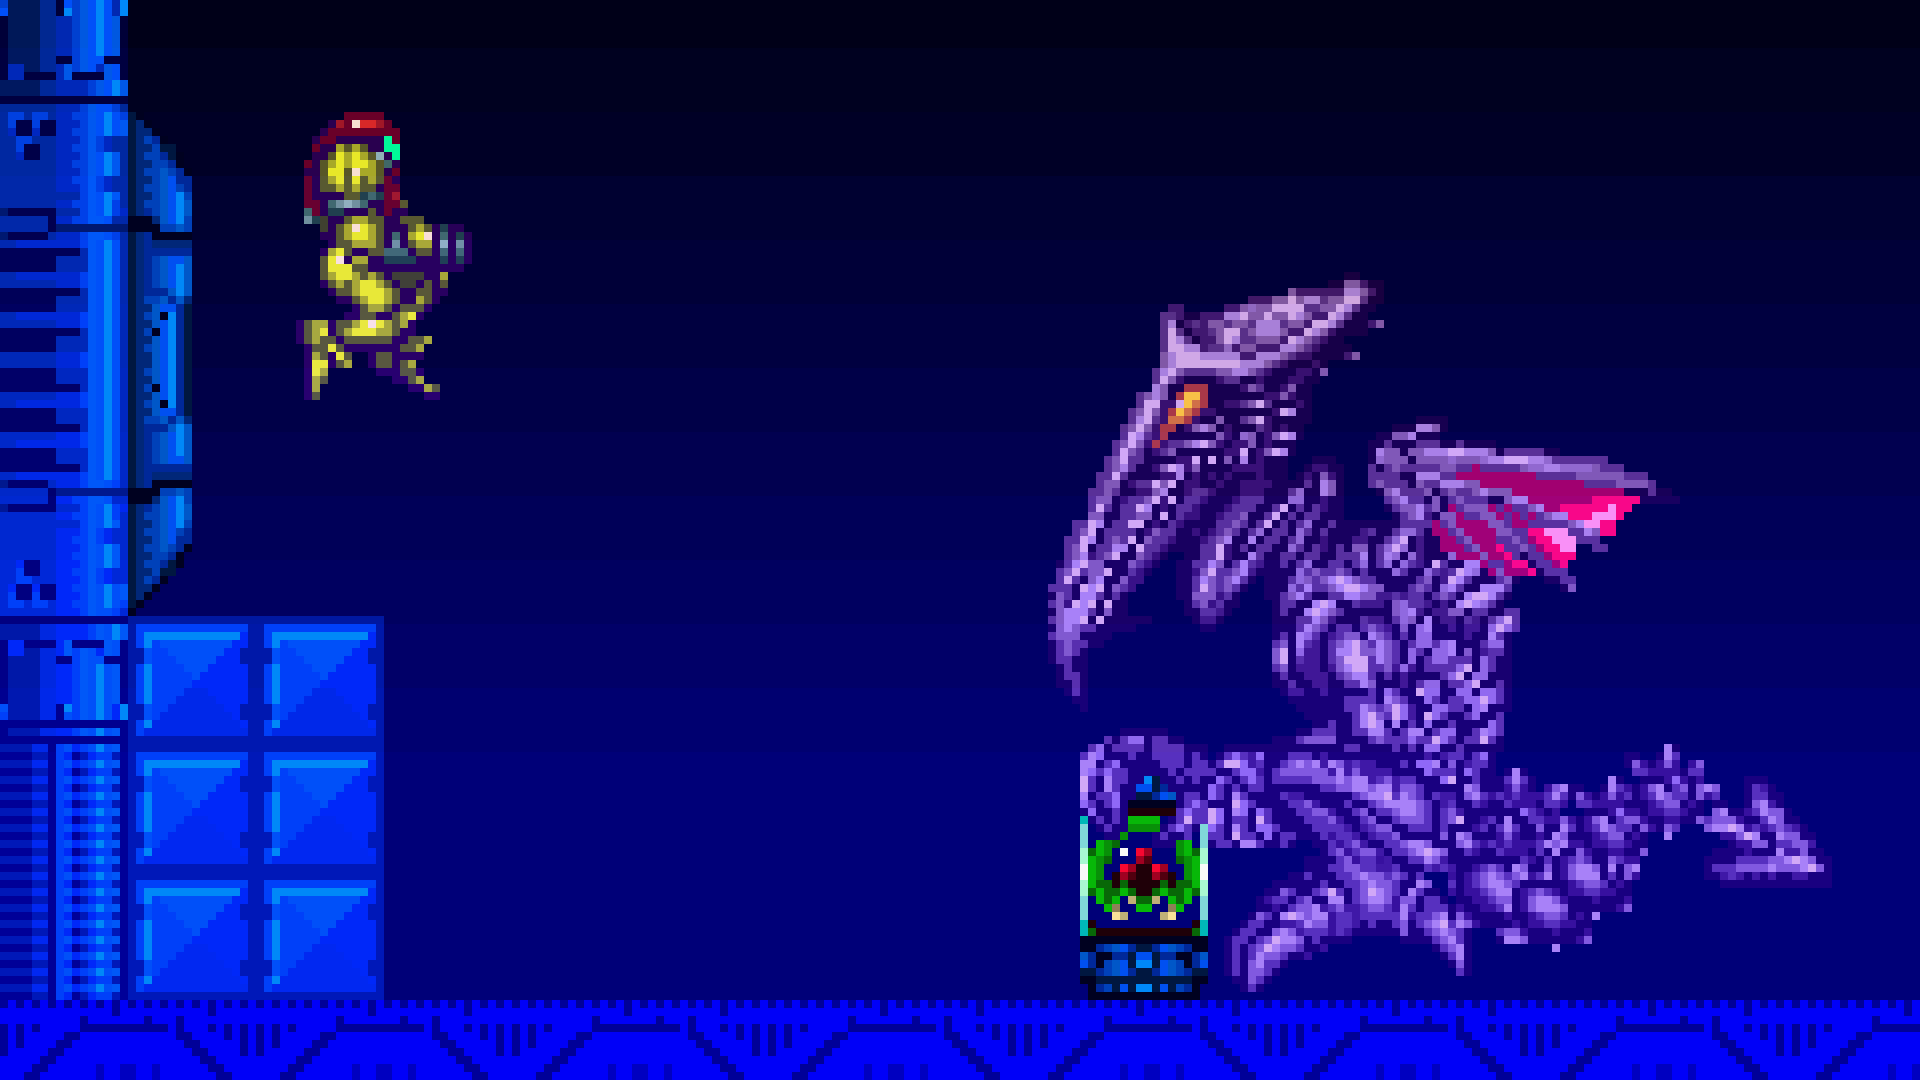 1920x1080 ... Special - Wallpaper - Super Metroid - Ridley by Thelimomon